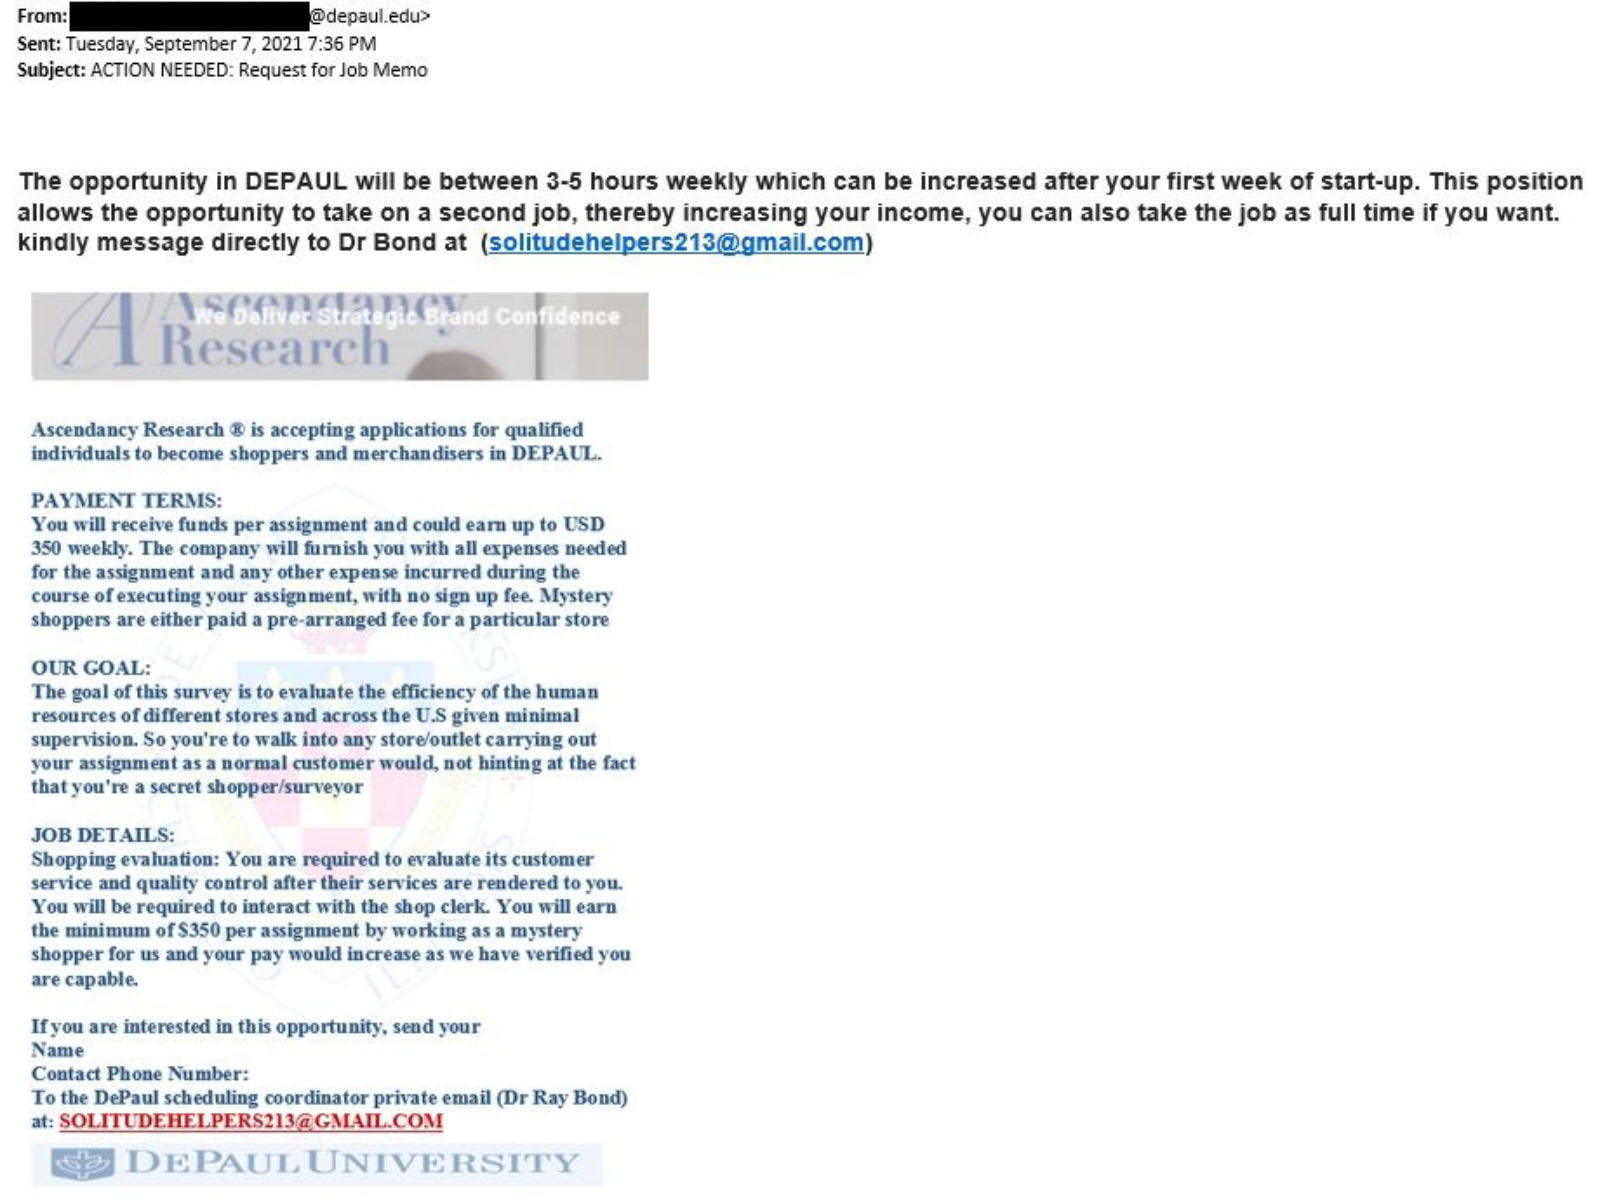 A screenshot of a malicious email. The malicious email attempts to trick victims into applying for a fake secret shopper job.